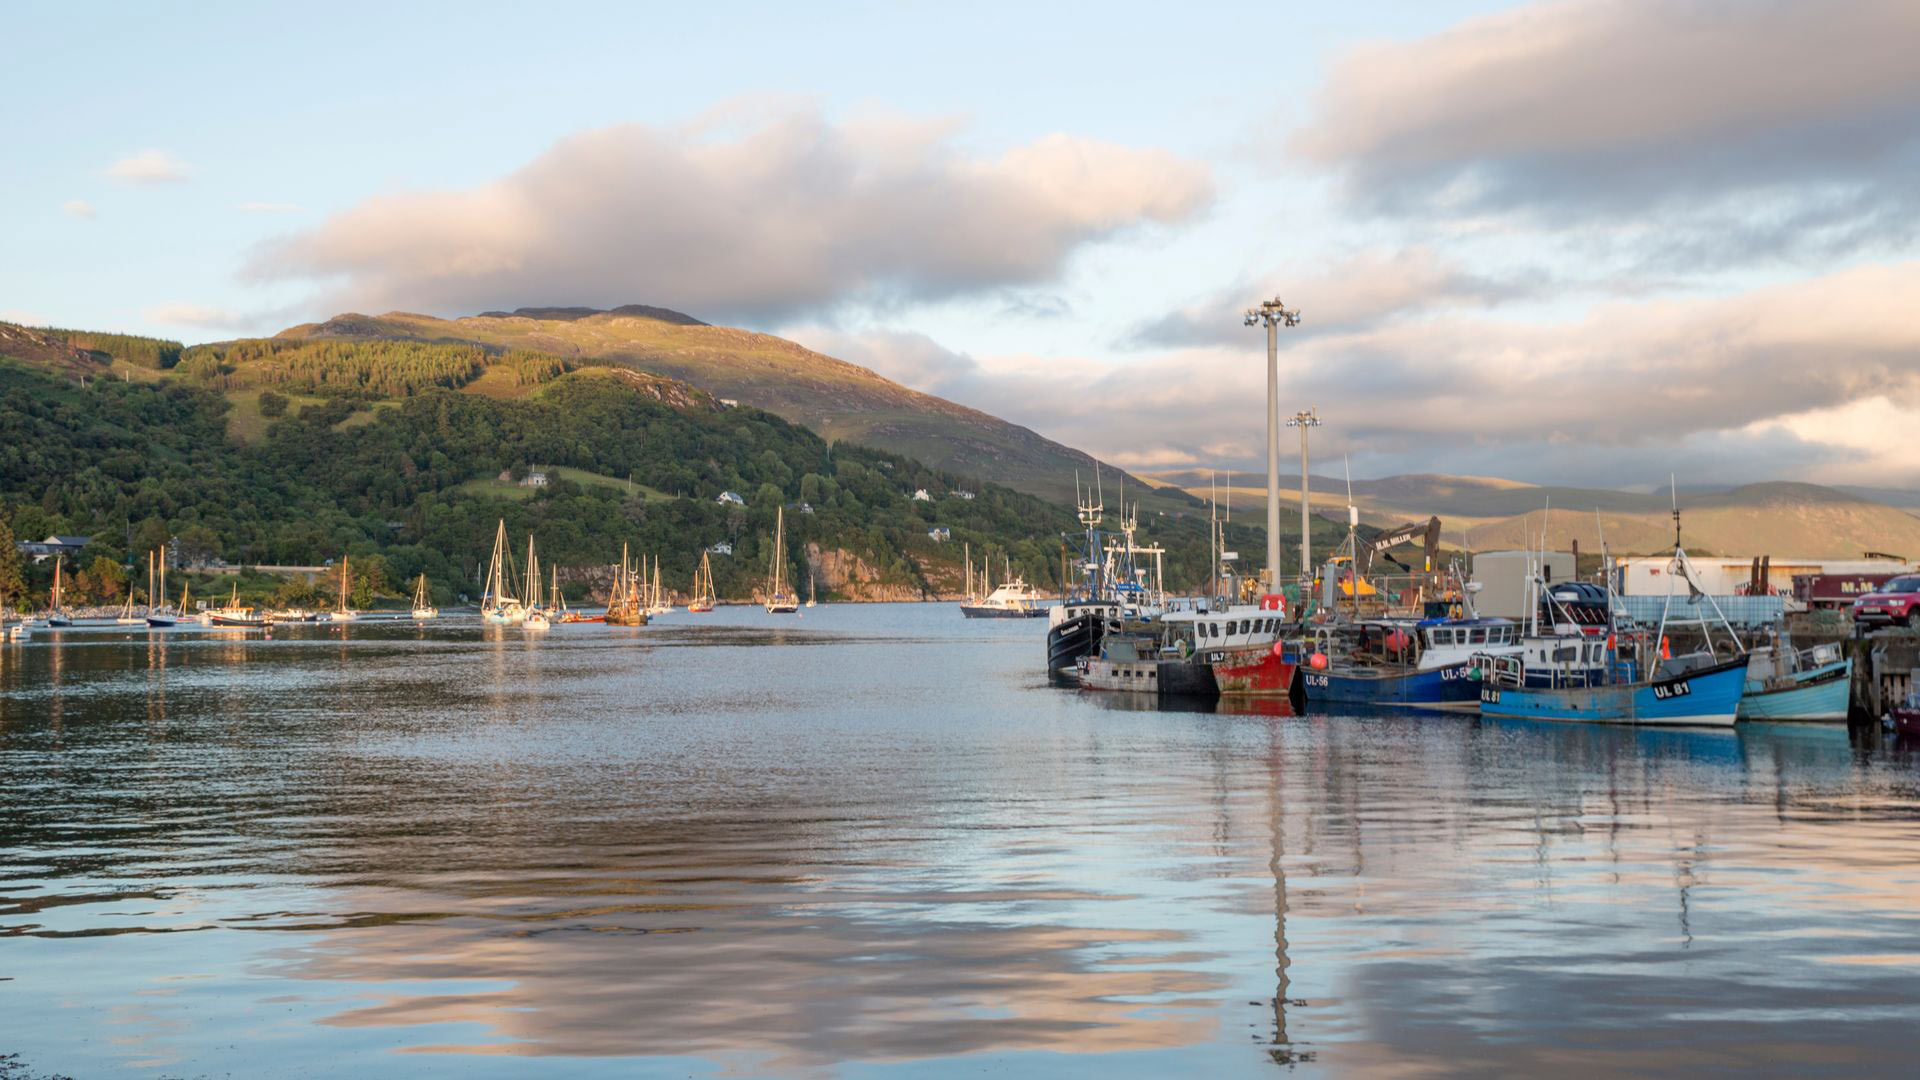 boats at the pier of Ullapool